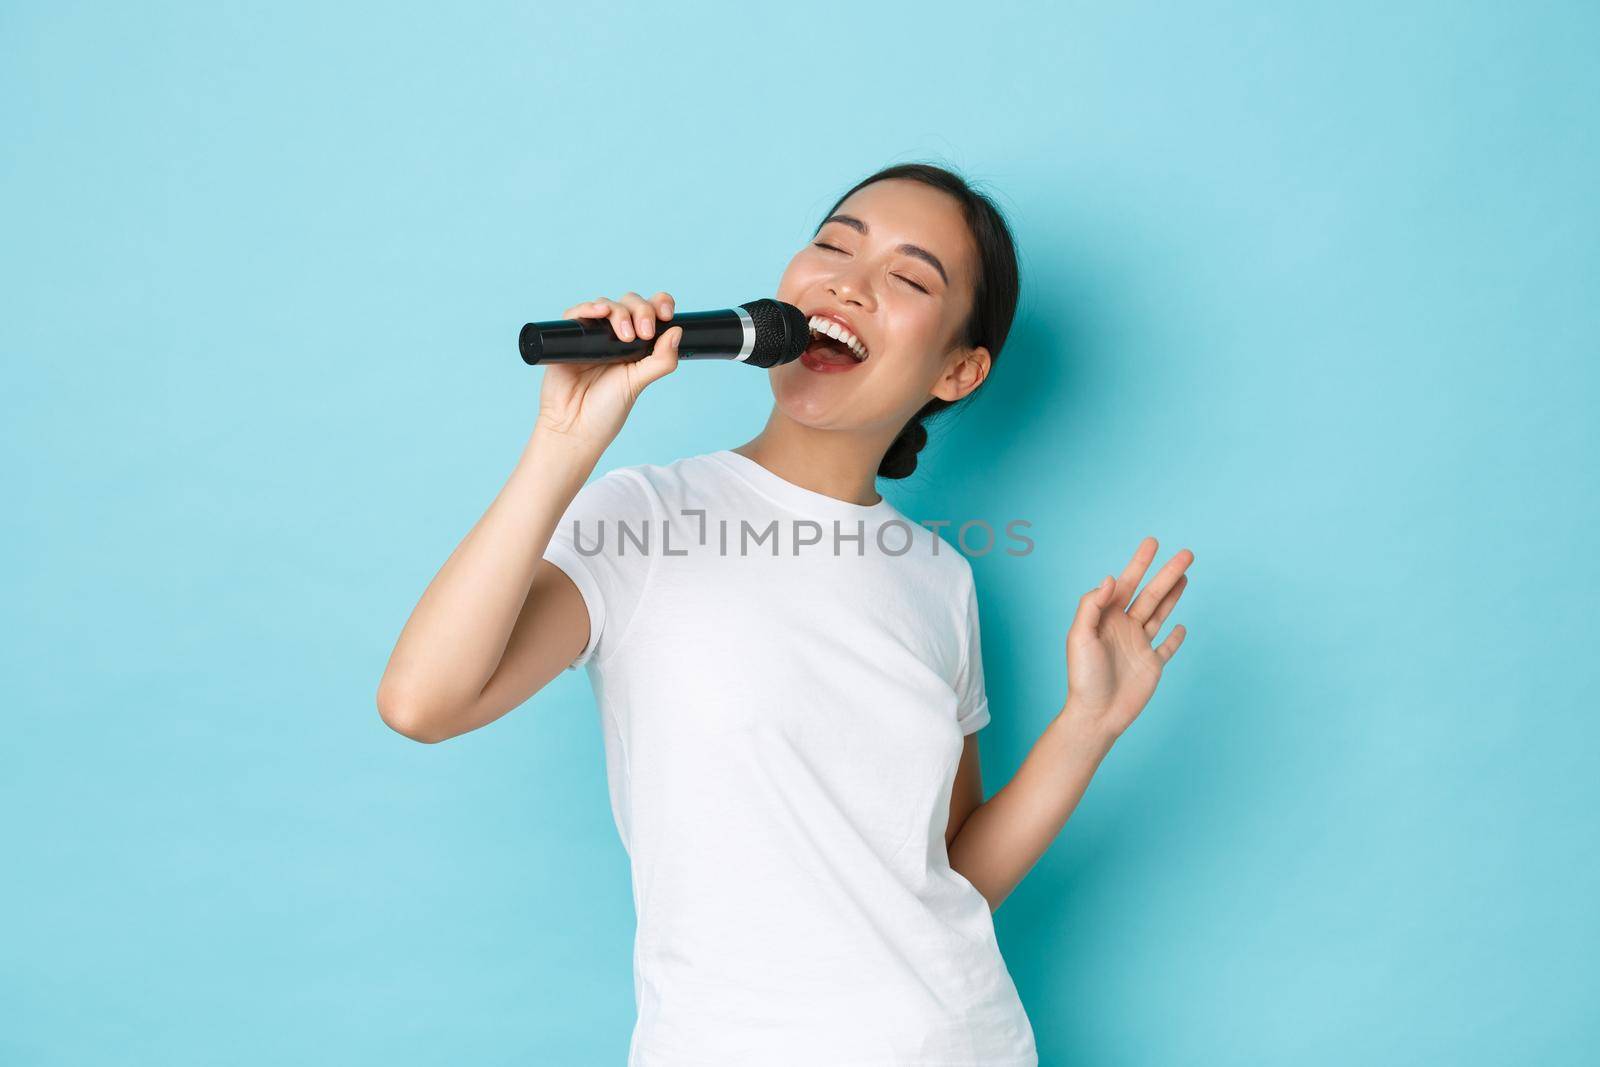 Lifestyle, people and leisure concept. Passionate and carefree pretty asian girl singing song in microphone, bending during performance, like going karaoke, standing light blue background performing.